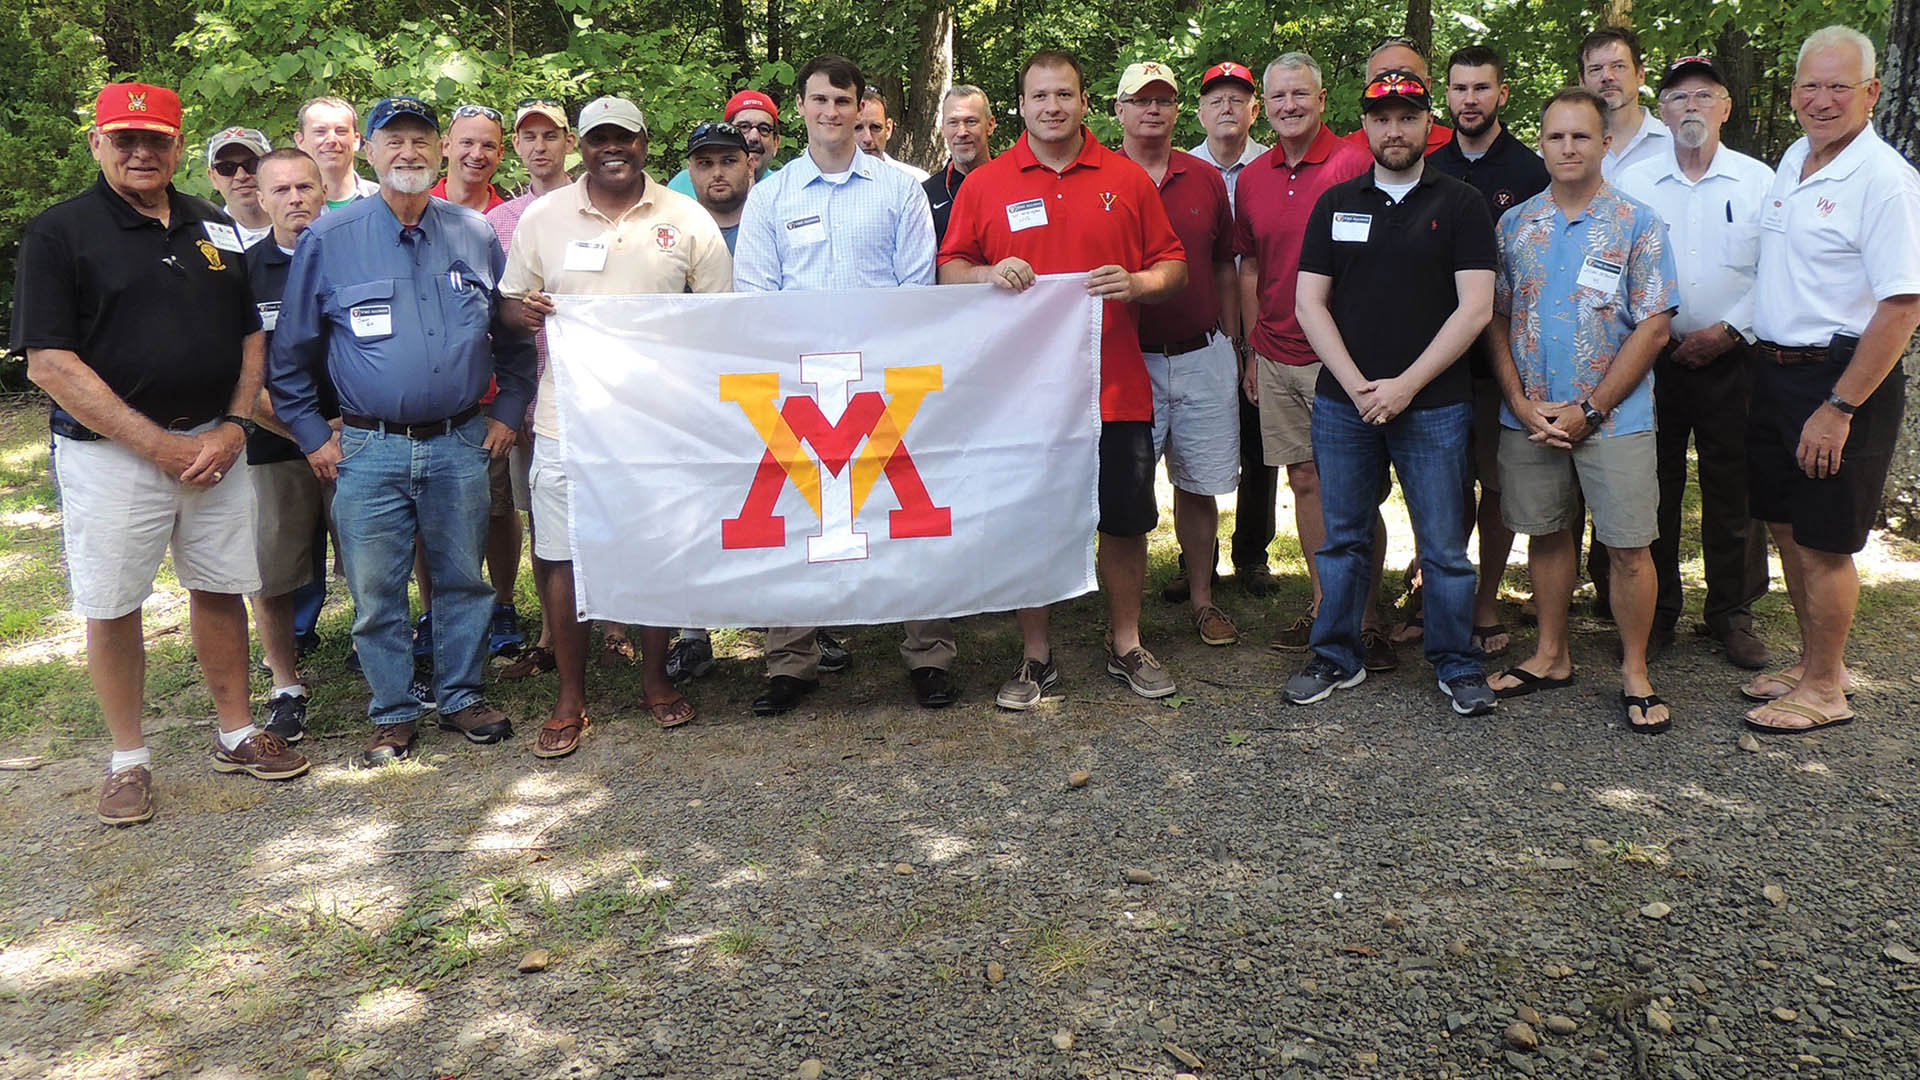 Group of people holding up a VMI flag, smiling.